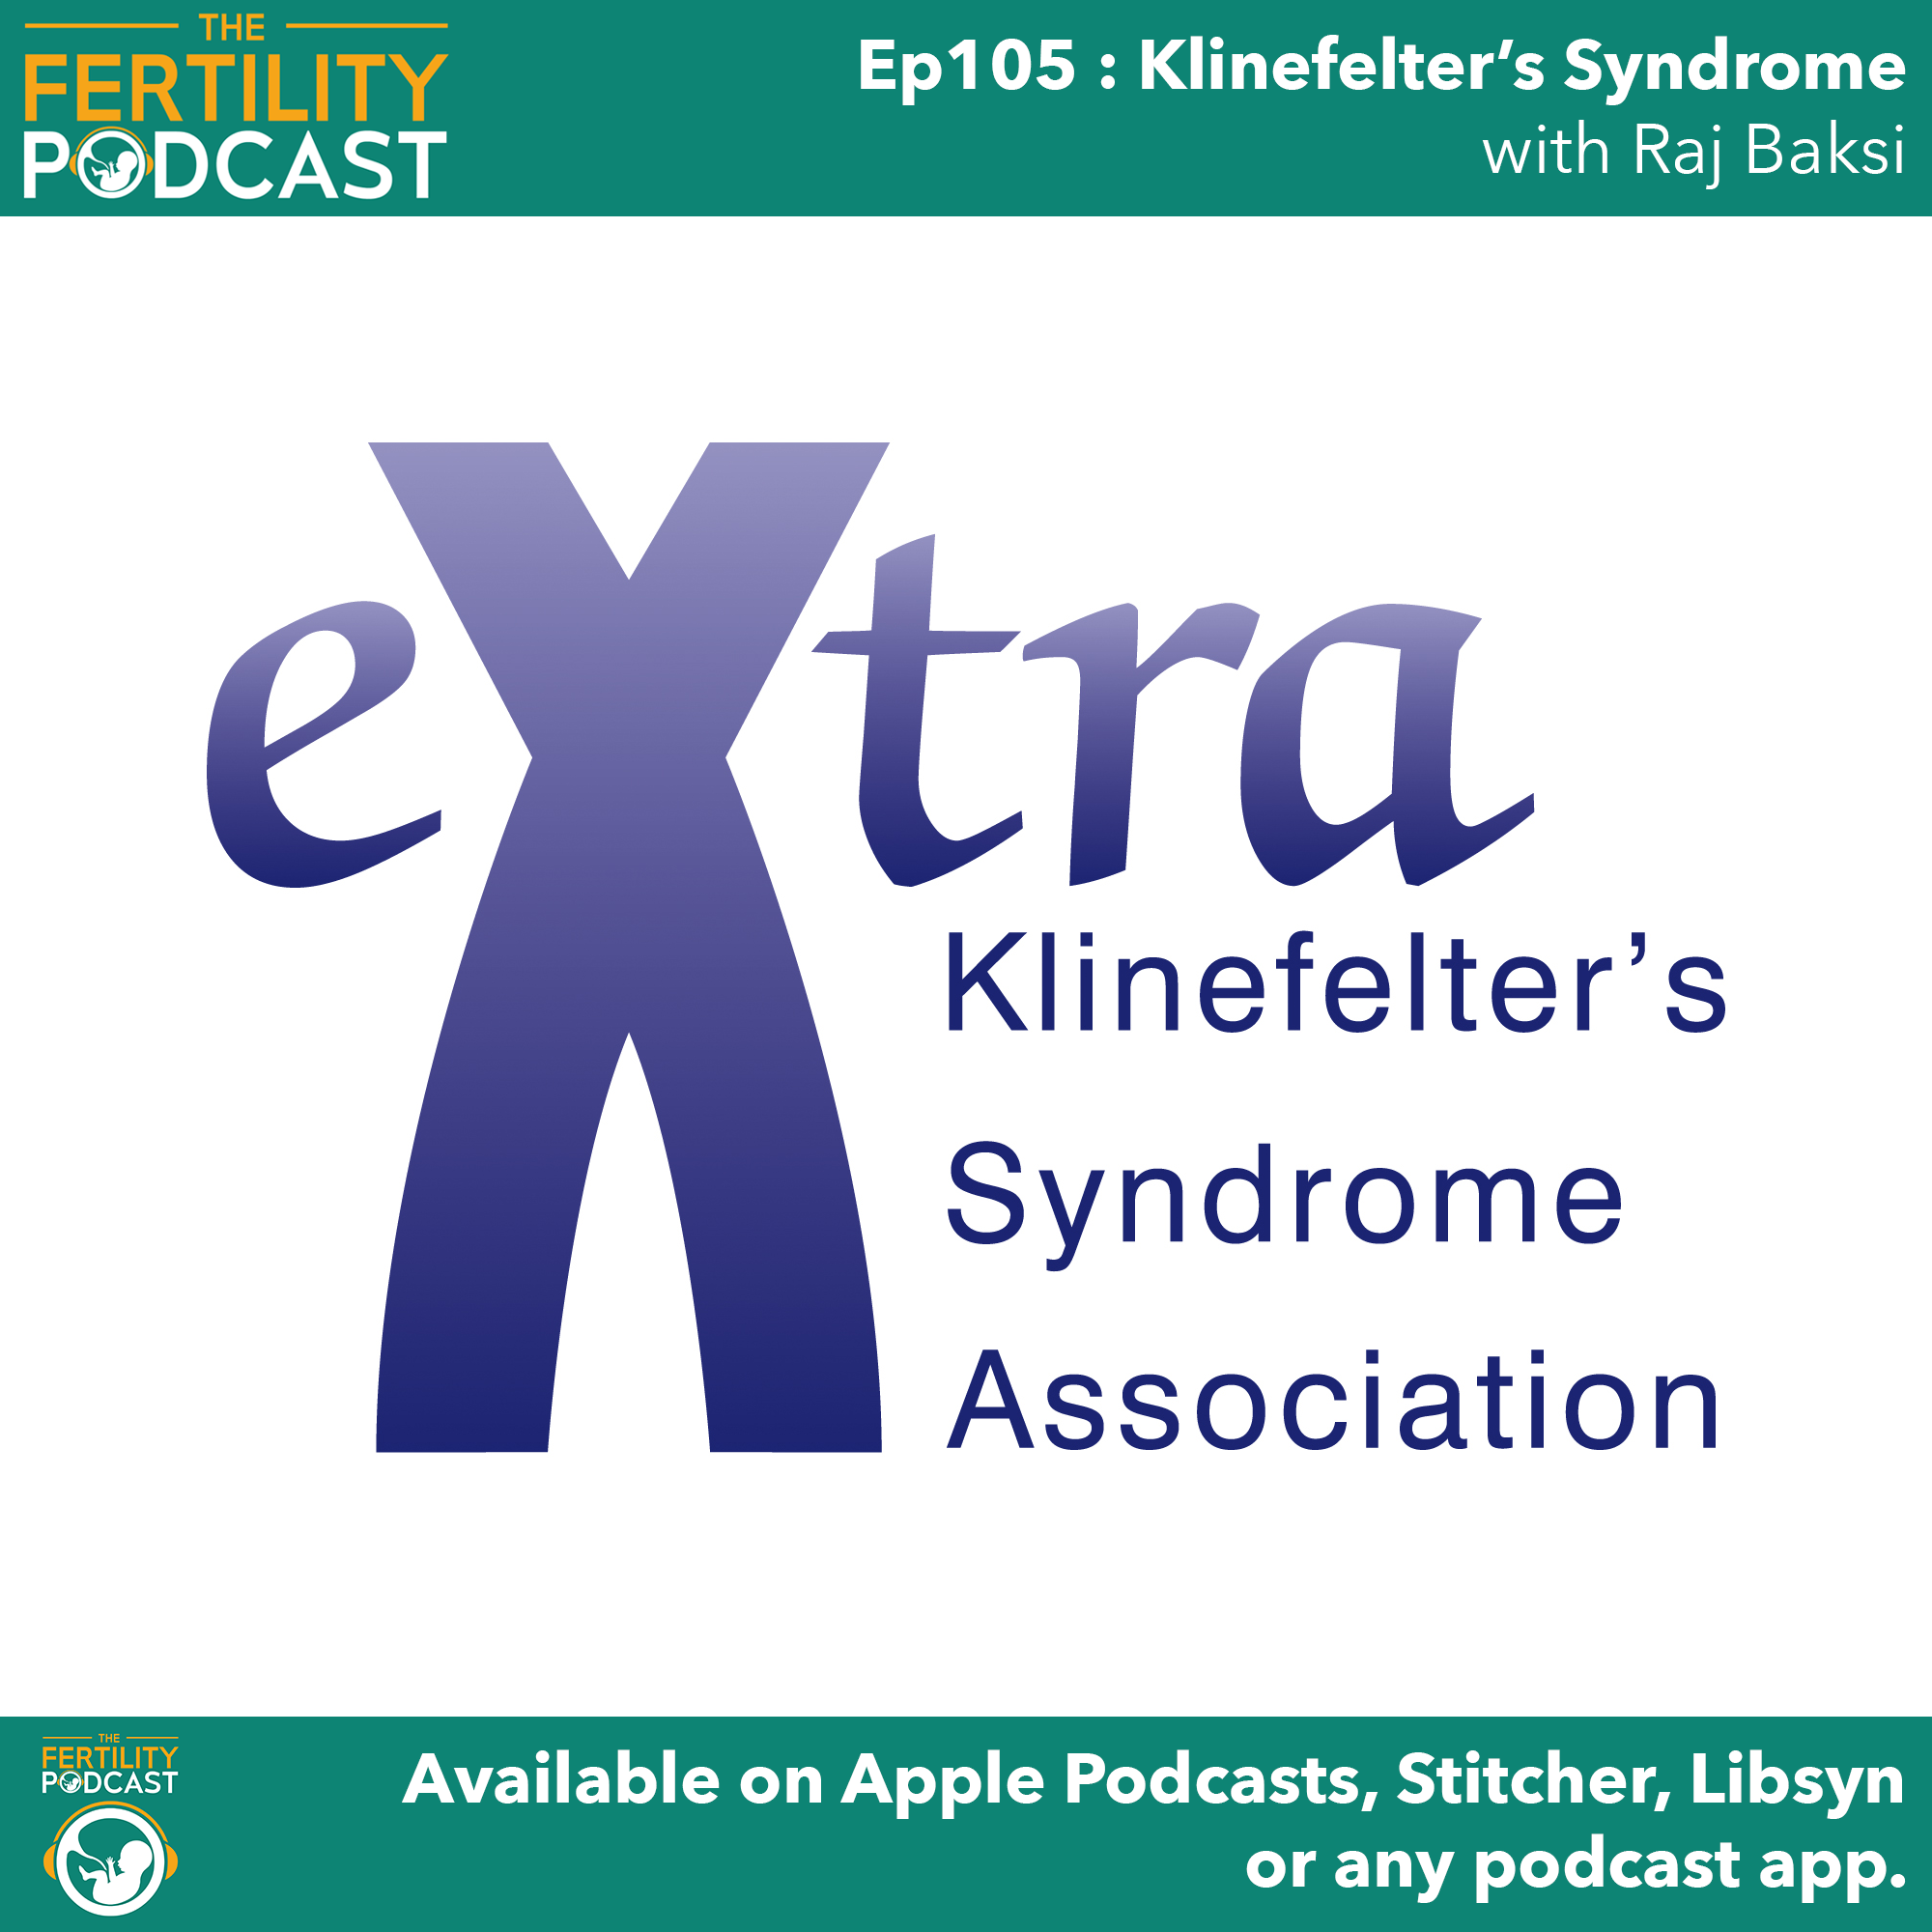 What is Klinefelter’s Syndrome?